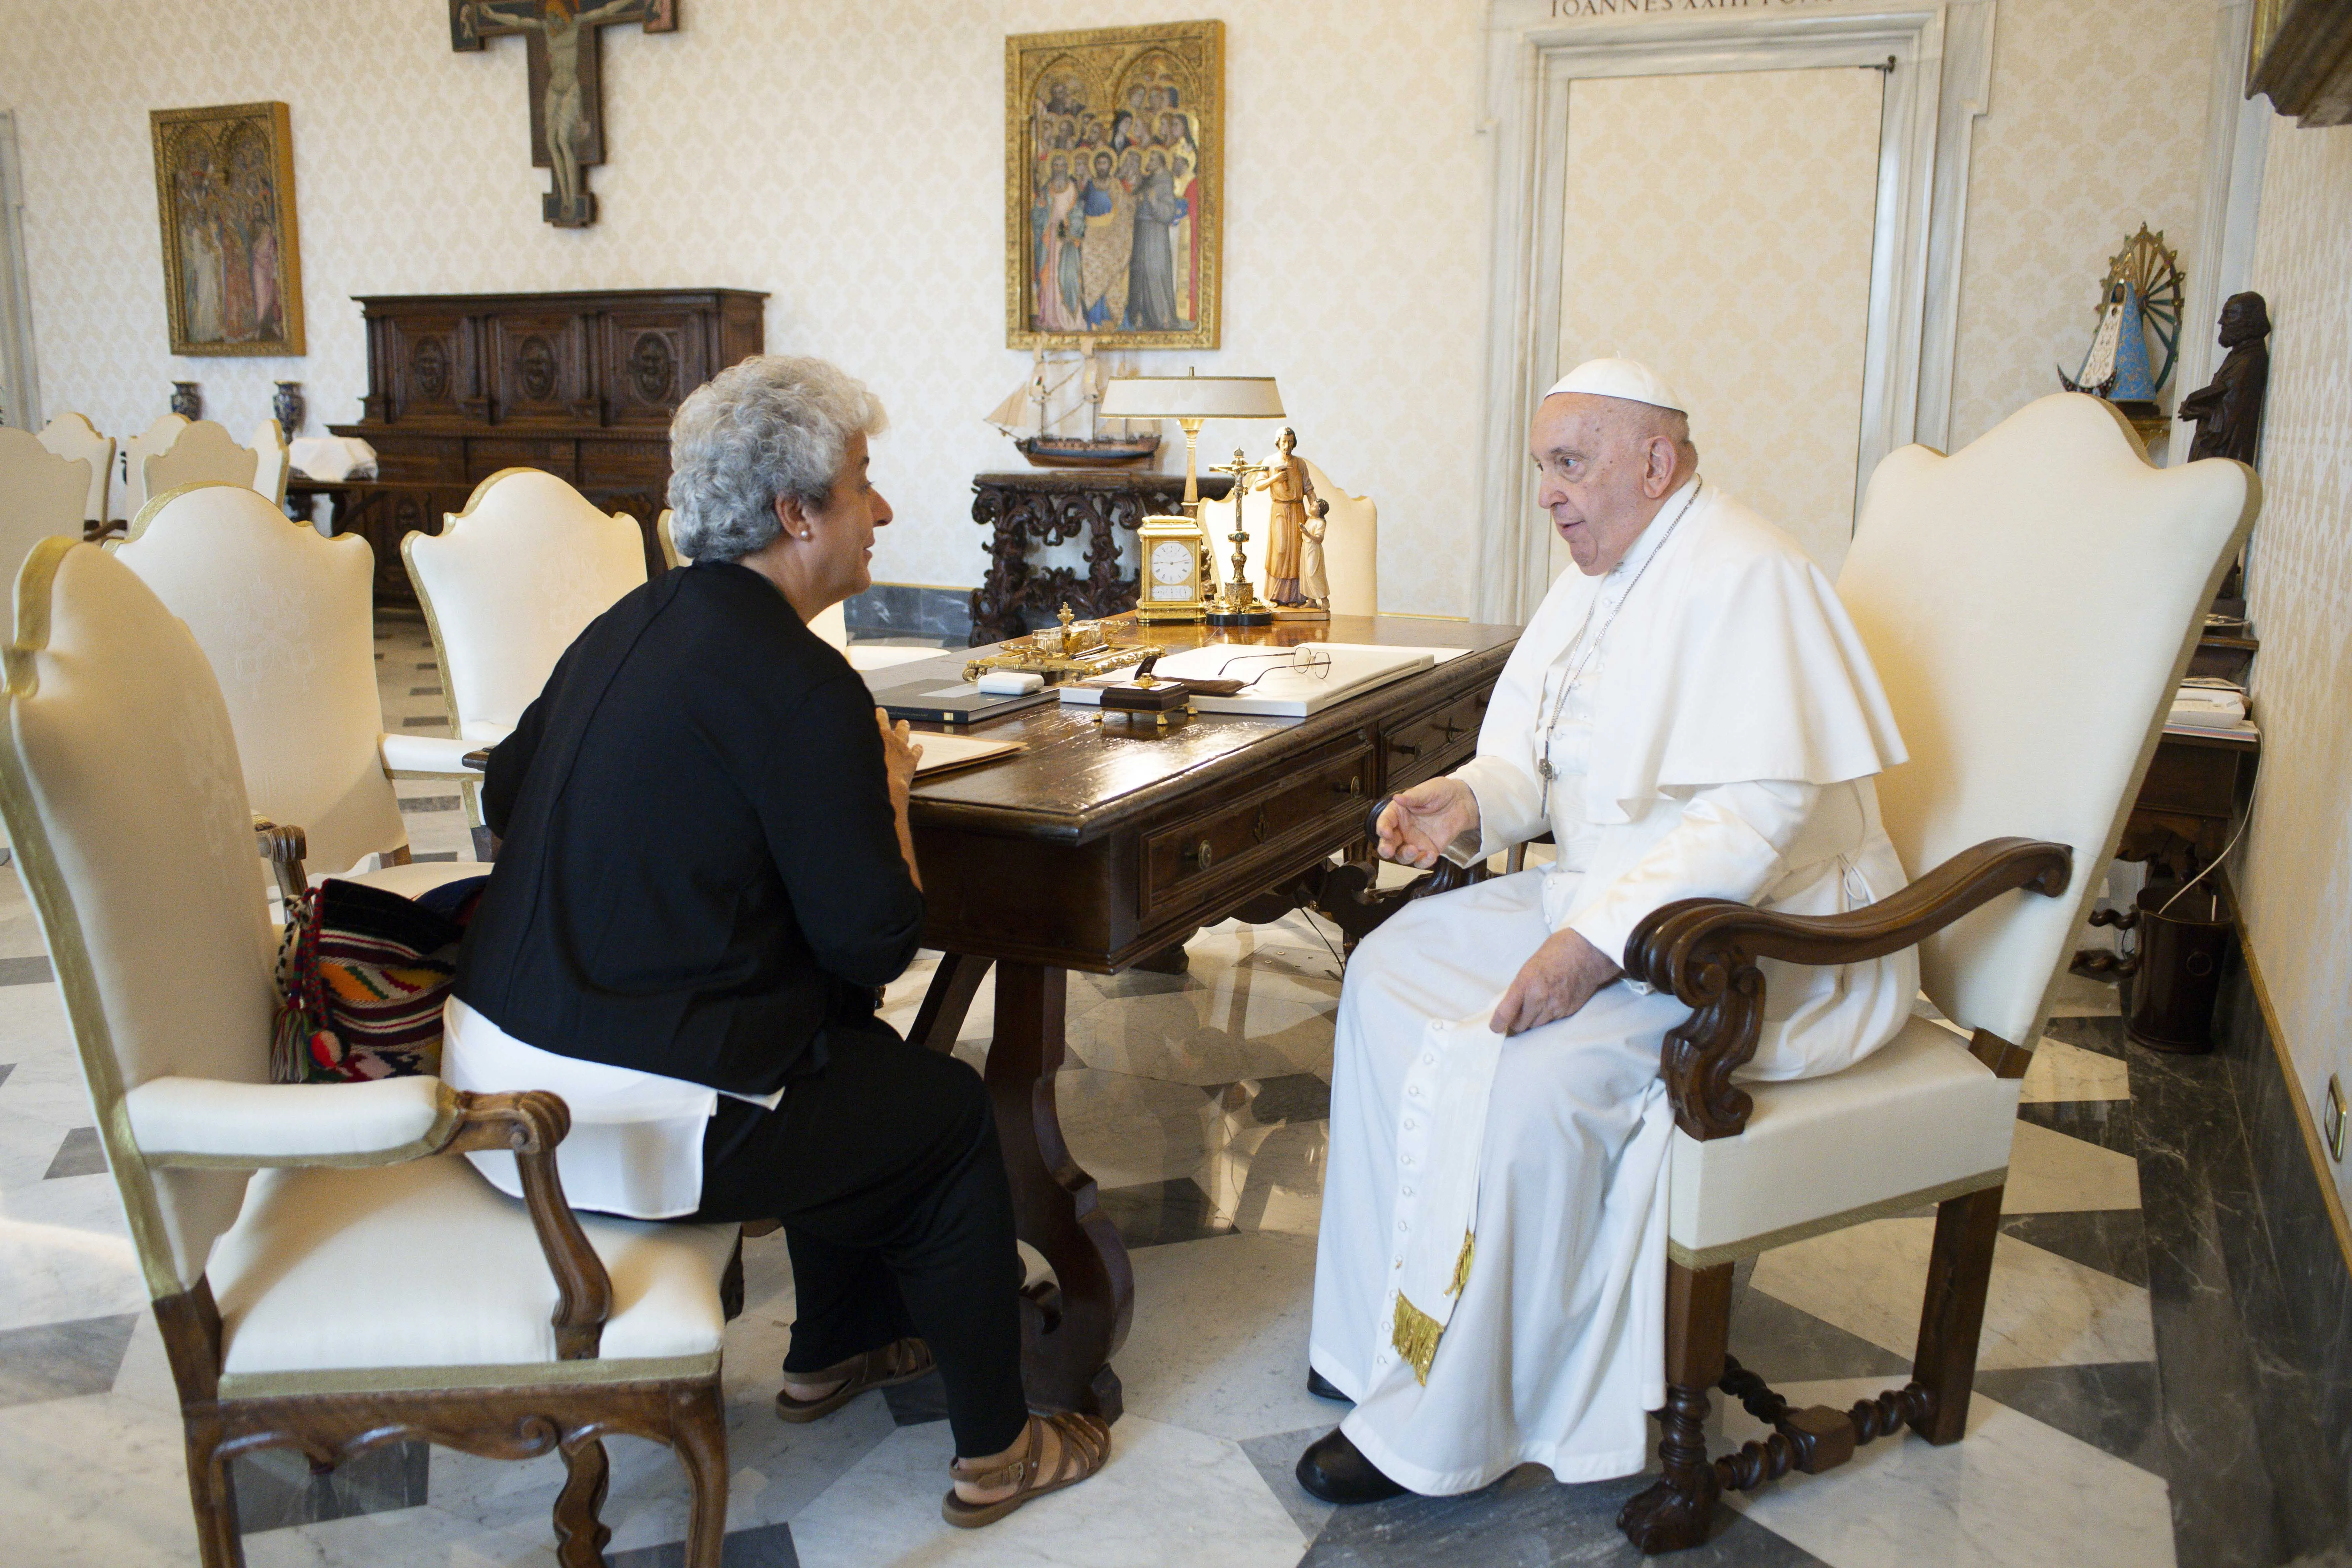 Pope Francis met Maria Campatelli, director of the Aletti Center, at the Vatican on Sept. 15, 2023. The Aletti Center was founded in Rome by the former Jesuit priest Father Marko Rupnik.?w=200&h=150